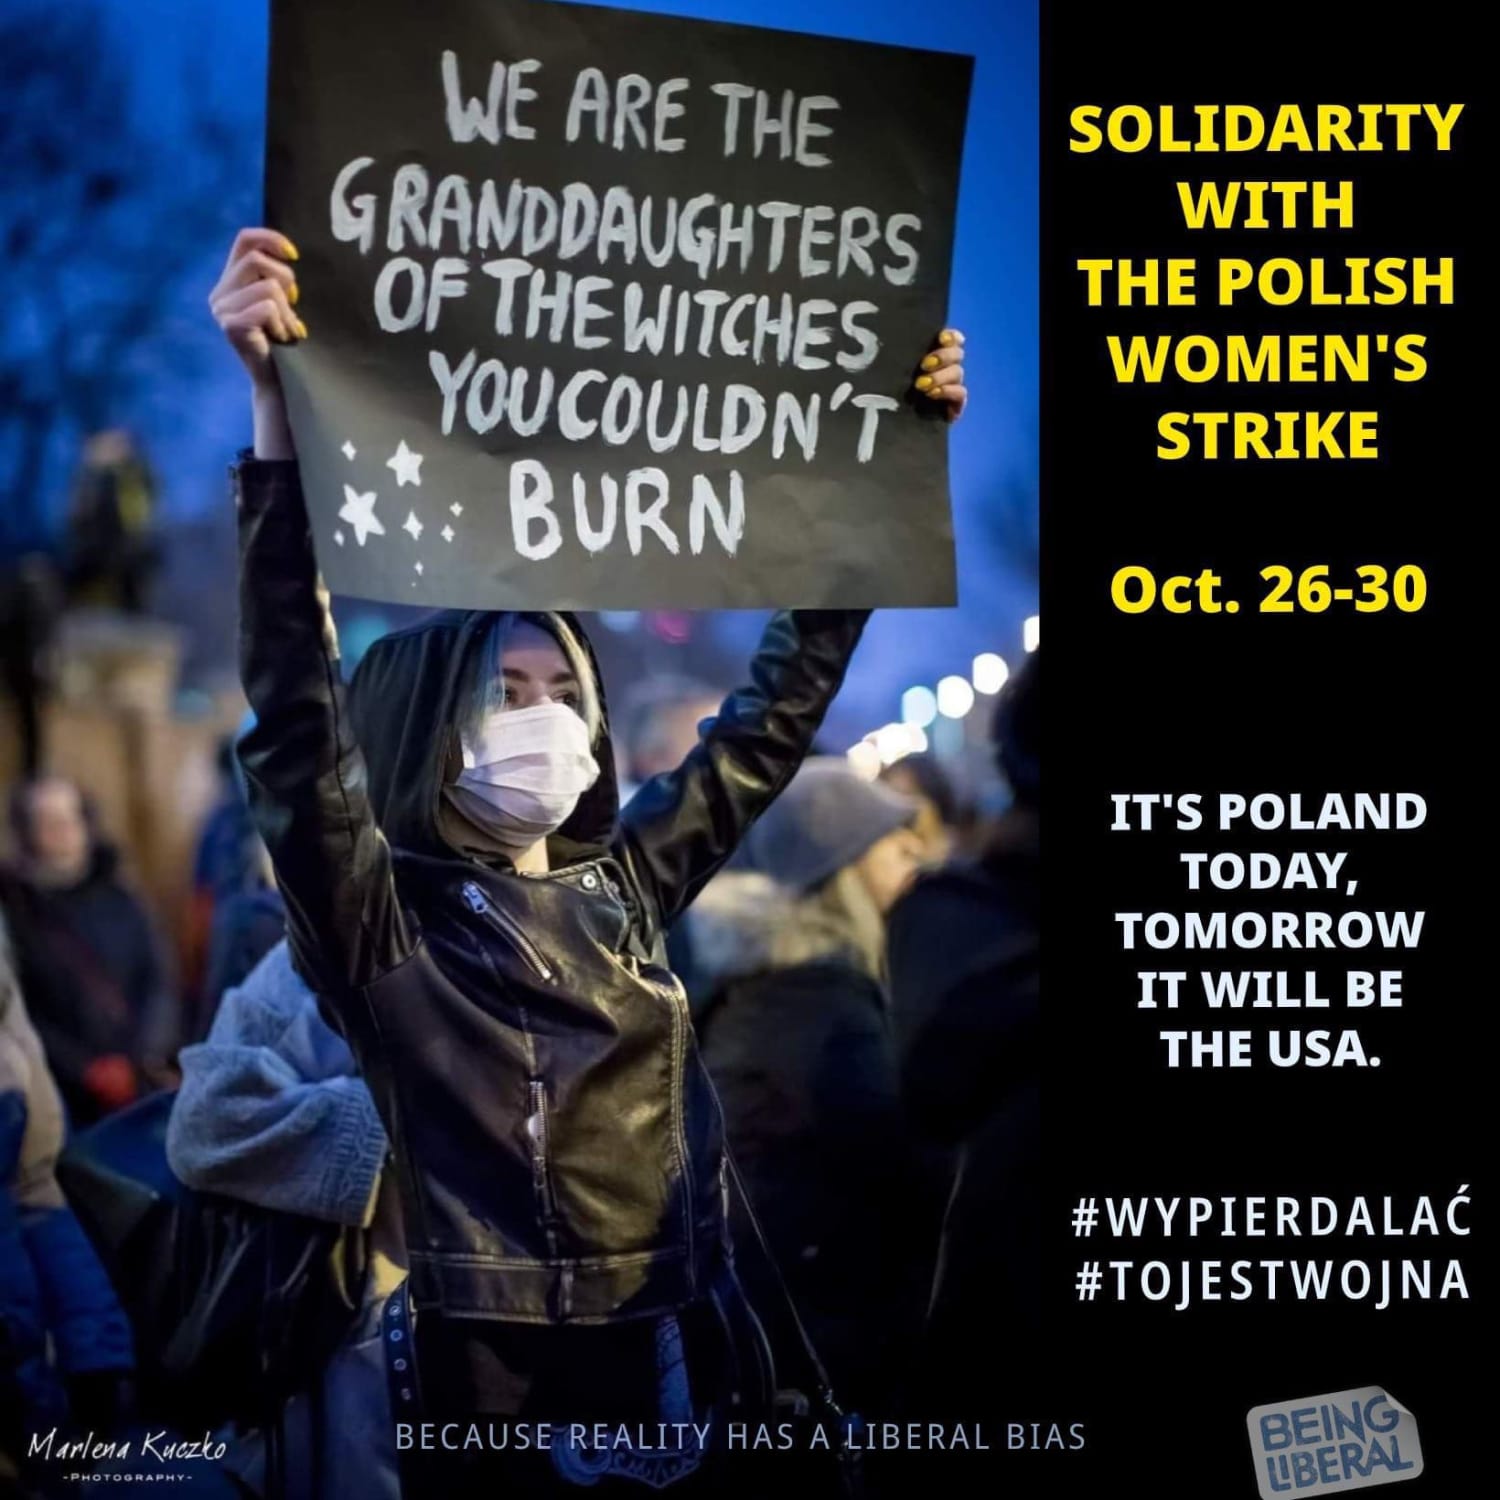 Solidarity with the Polish Women’s Strike